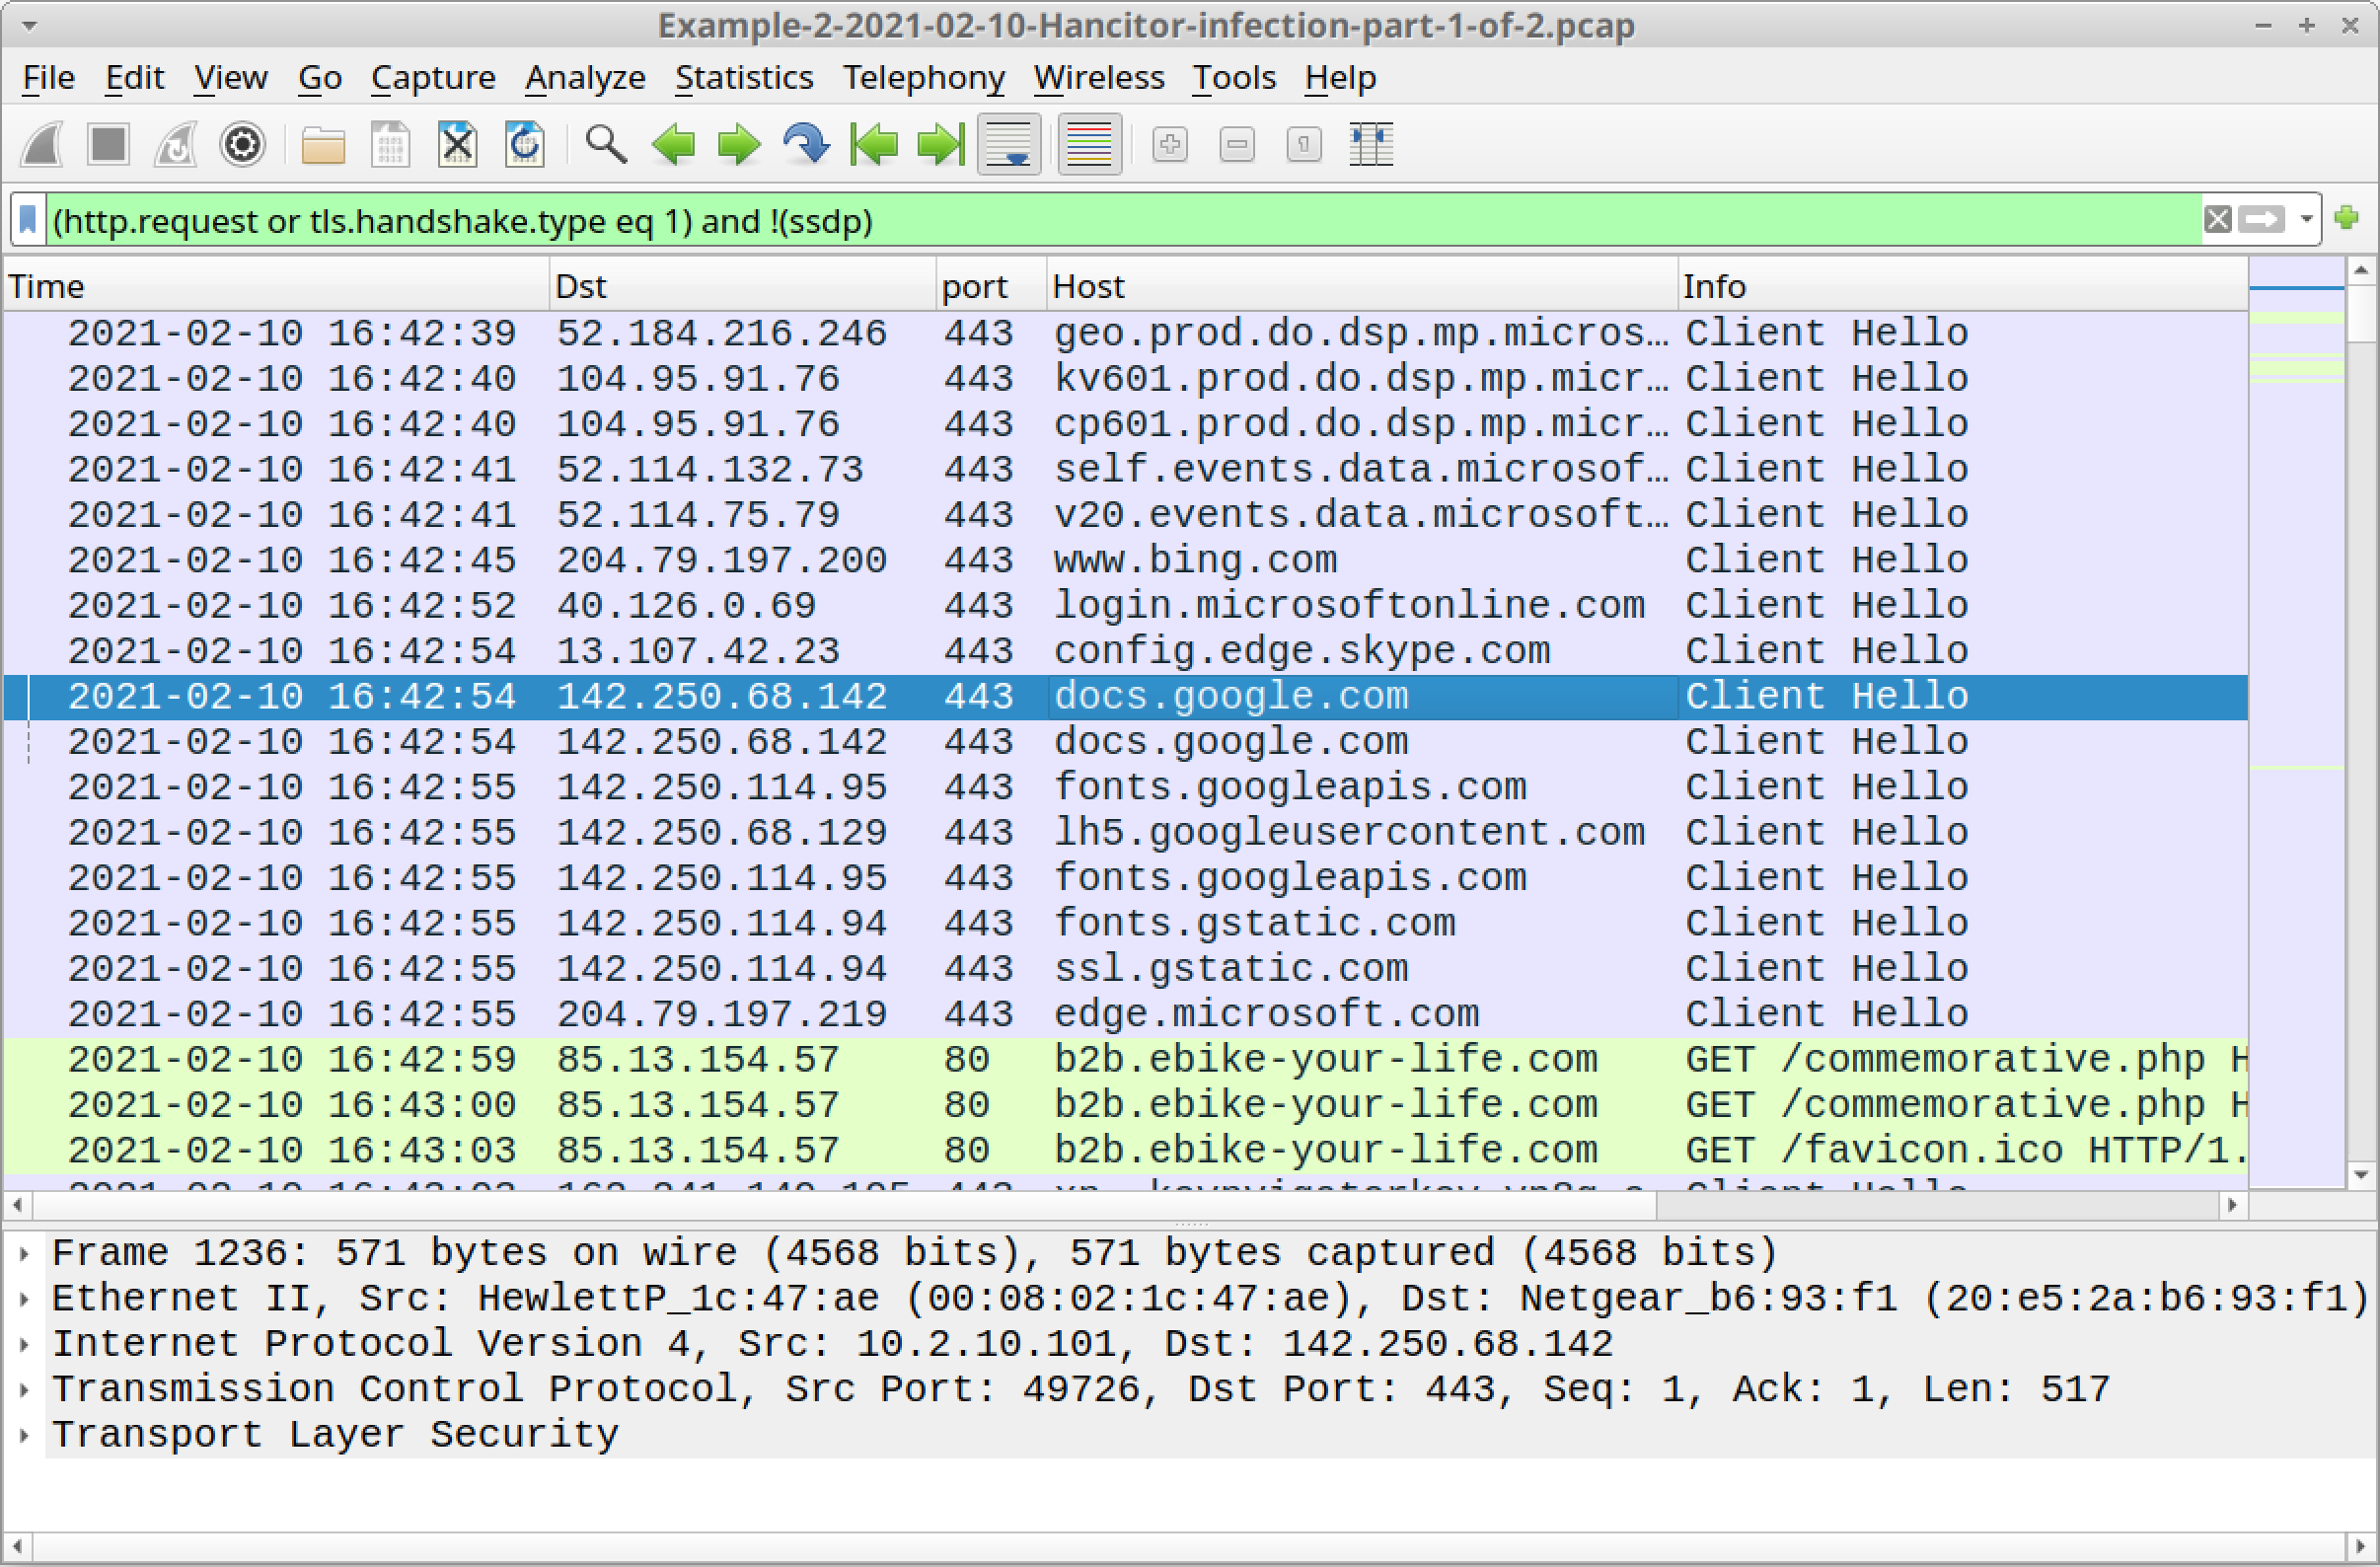 The screenshot shows the Wireshark column display after opening the Example 2, part 1 pcap and applying a basic web filter. A Google Docs link is highlighted in blue. 